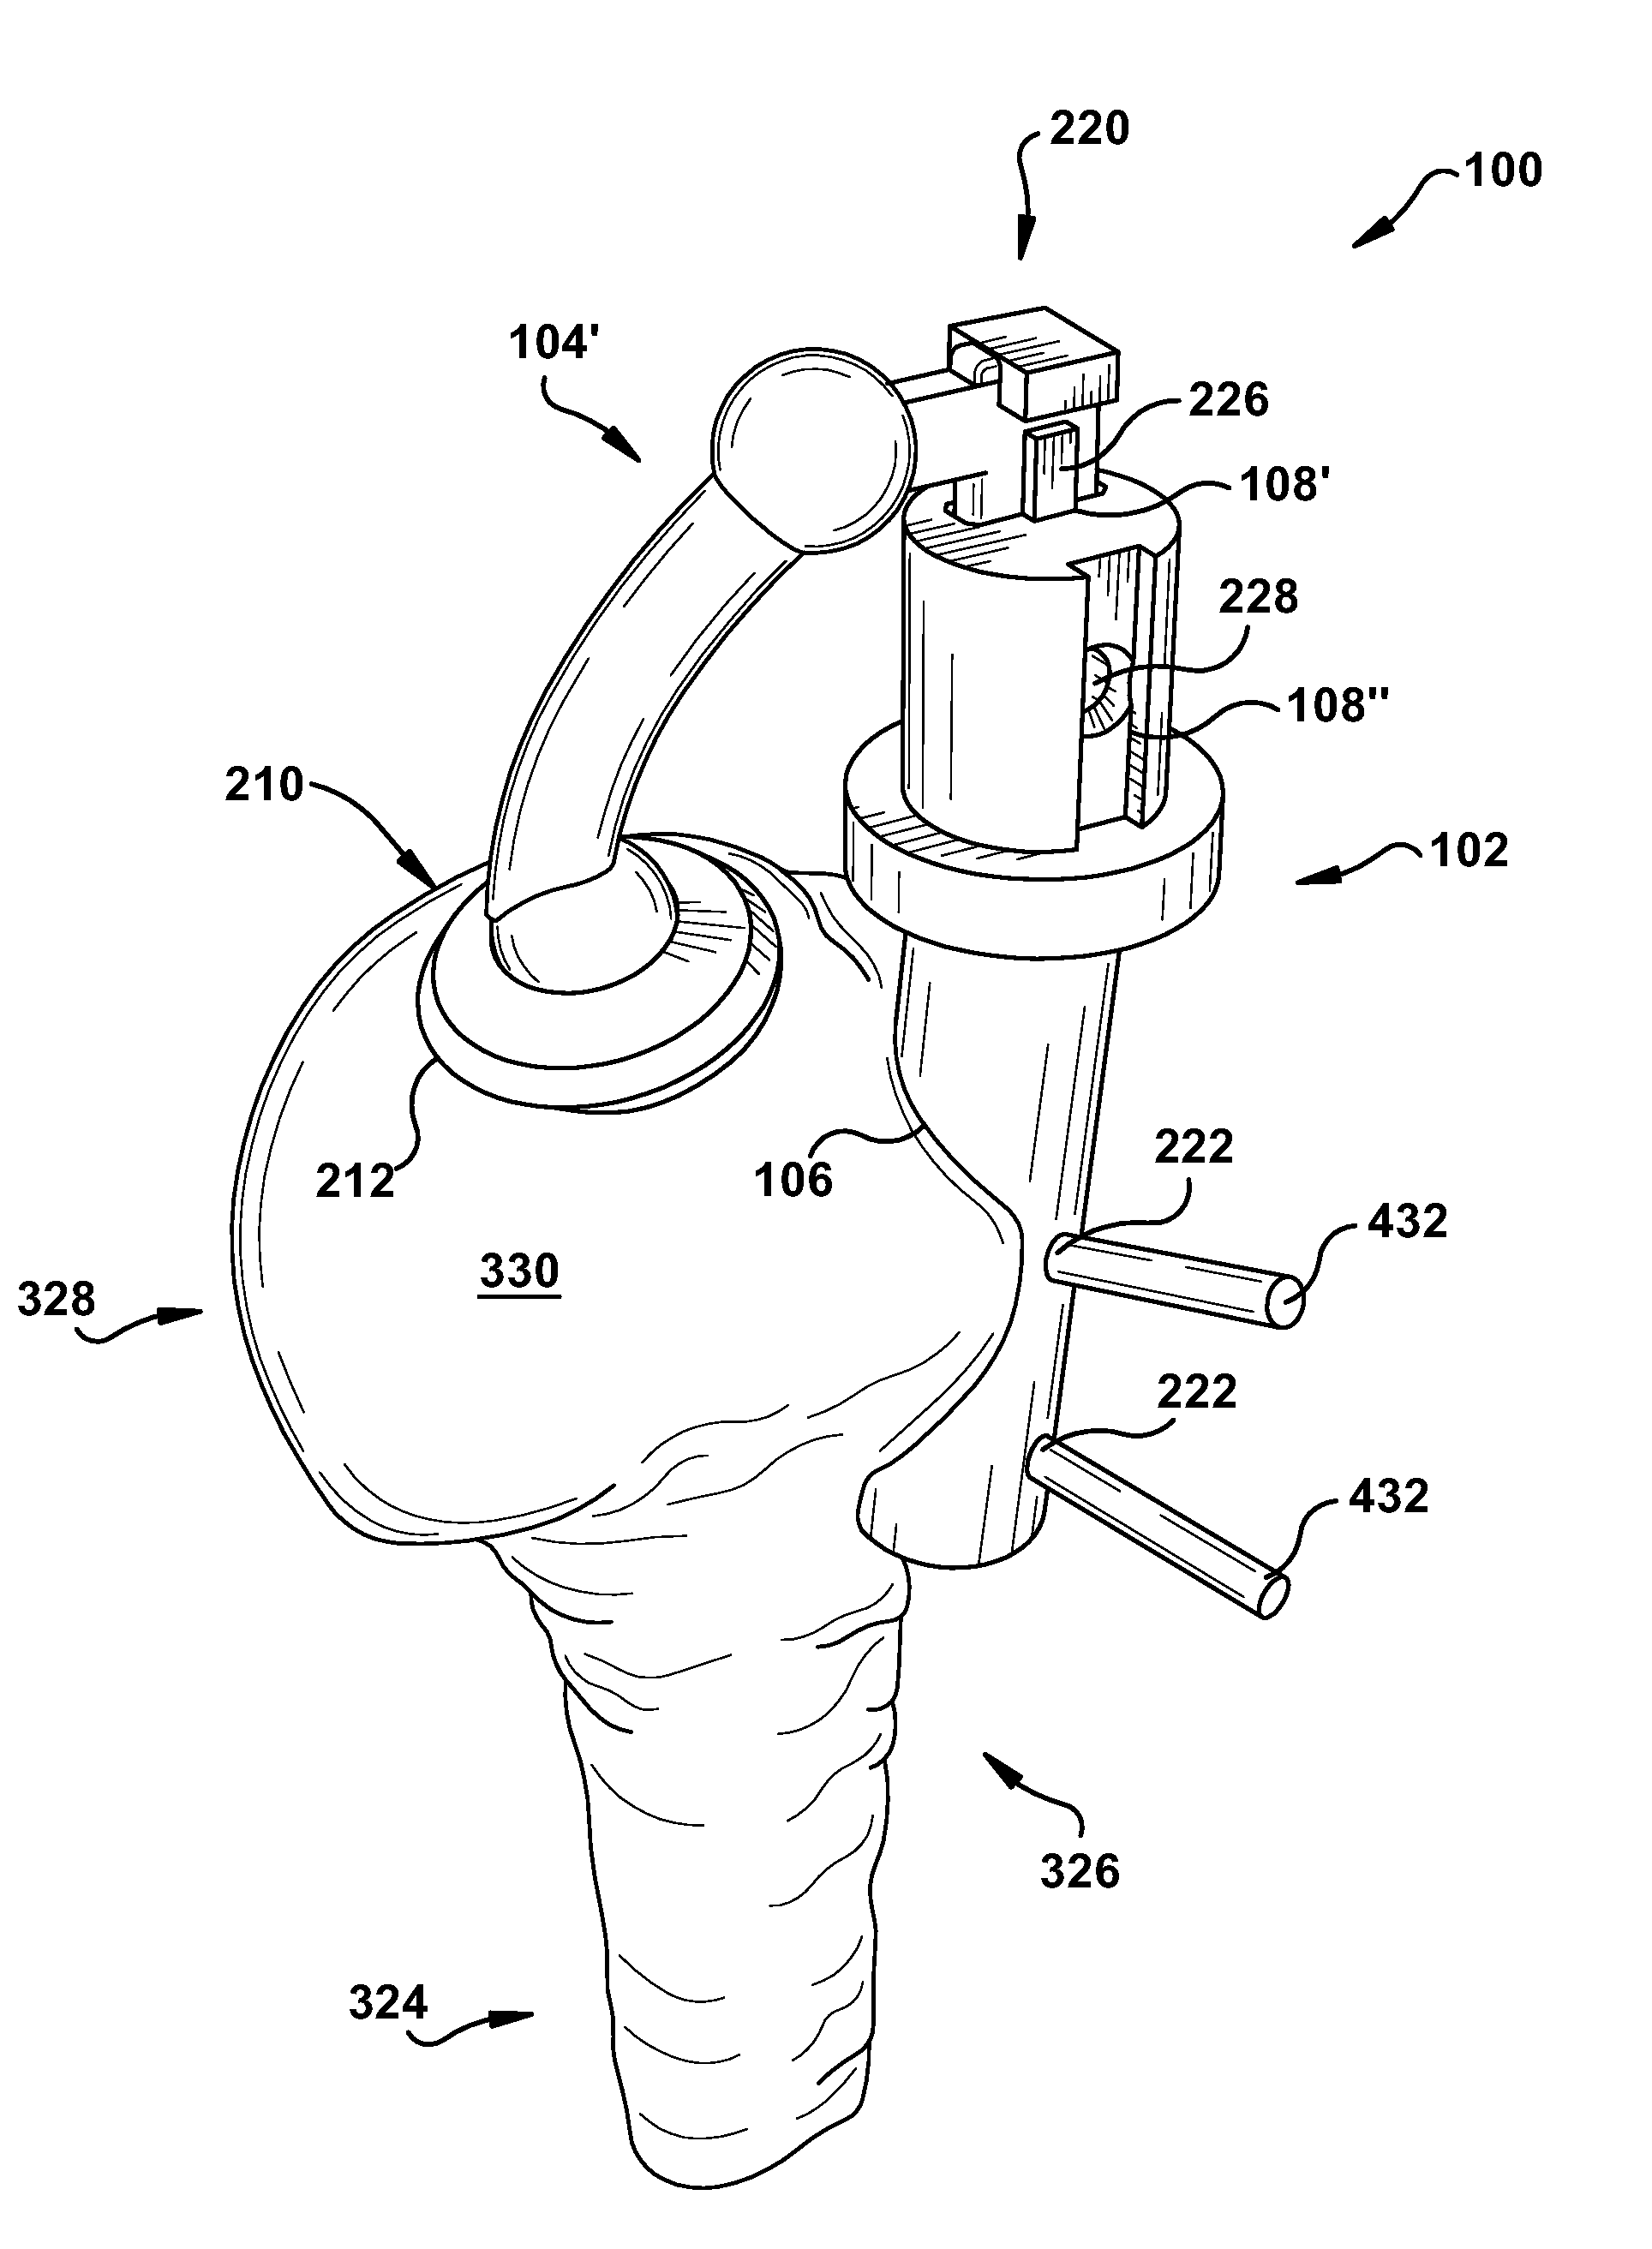 Apparatus and method for providing a reference indication to a patient tissue